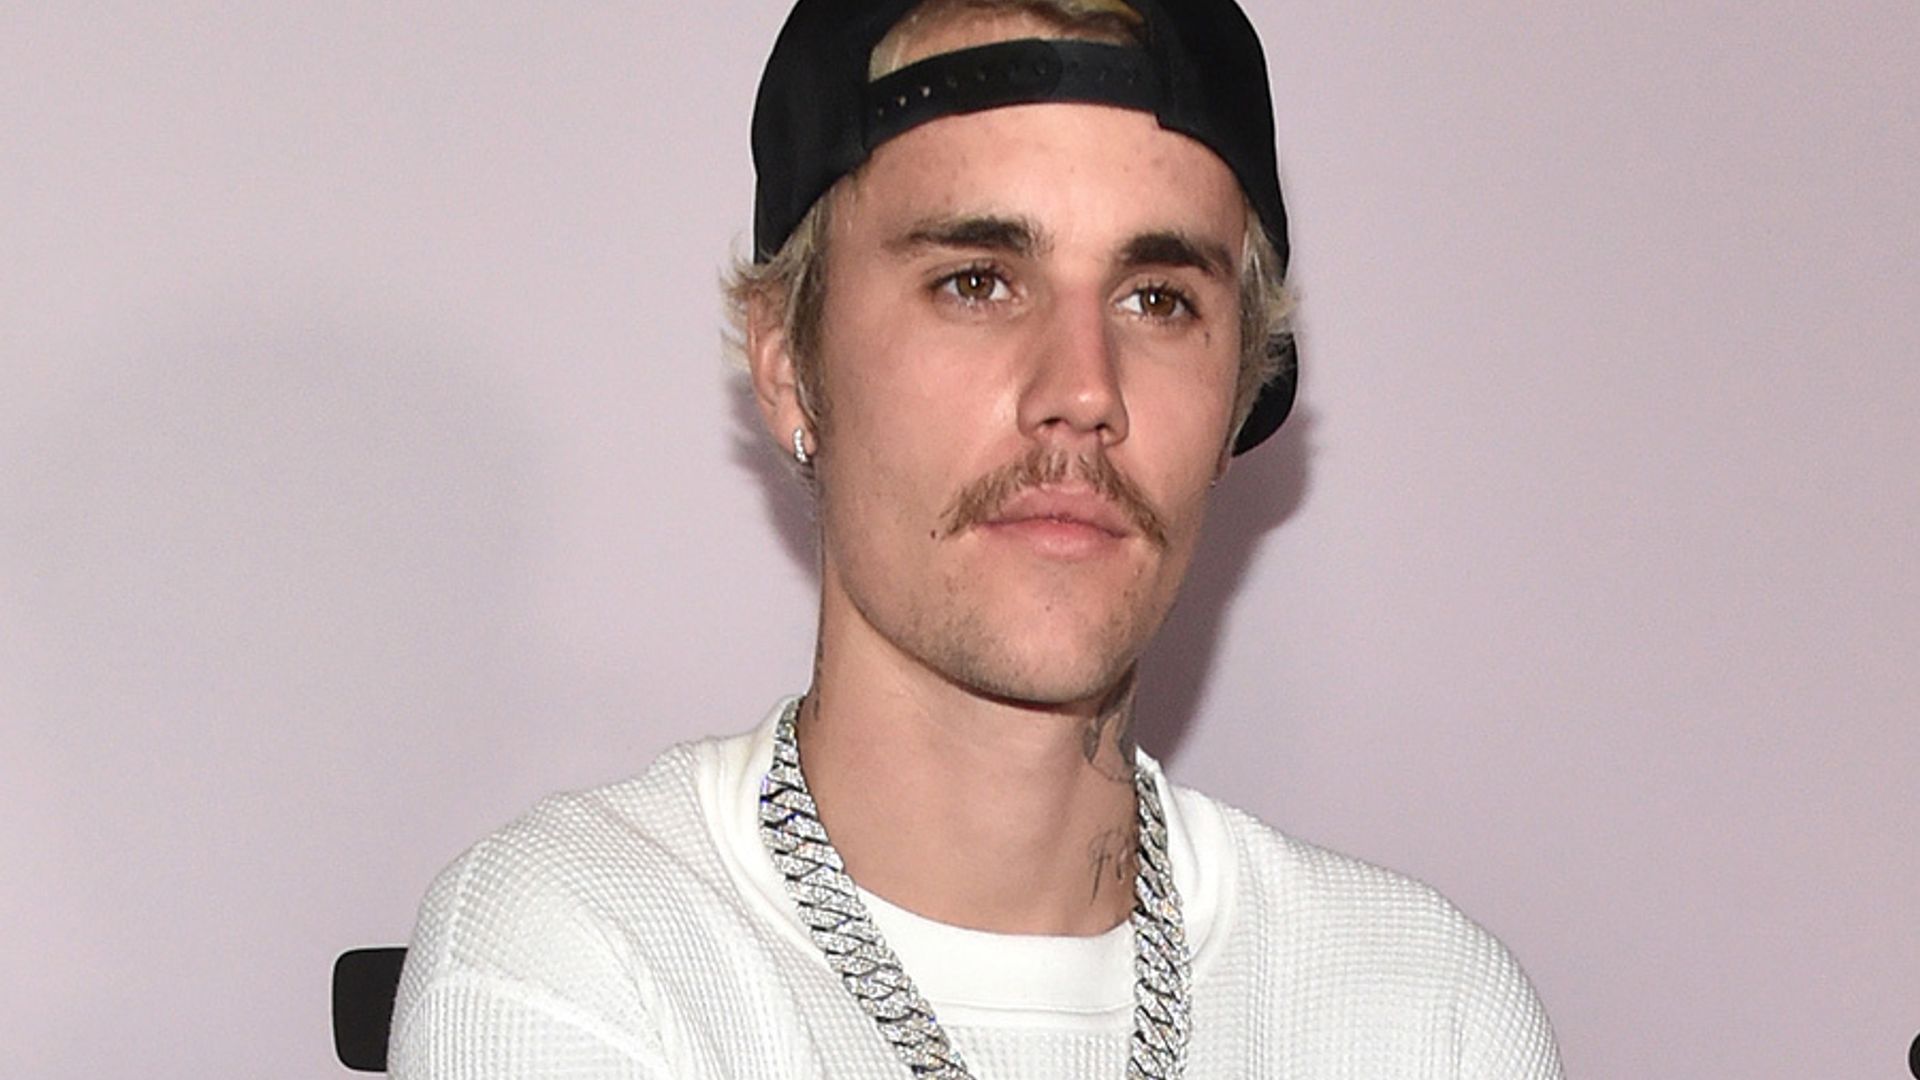 Justin Bieber opens up getting sober in new documentary series